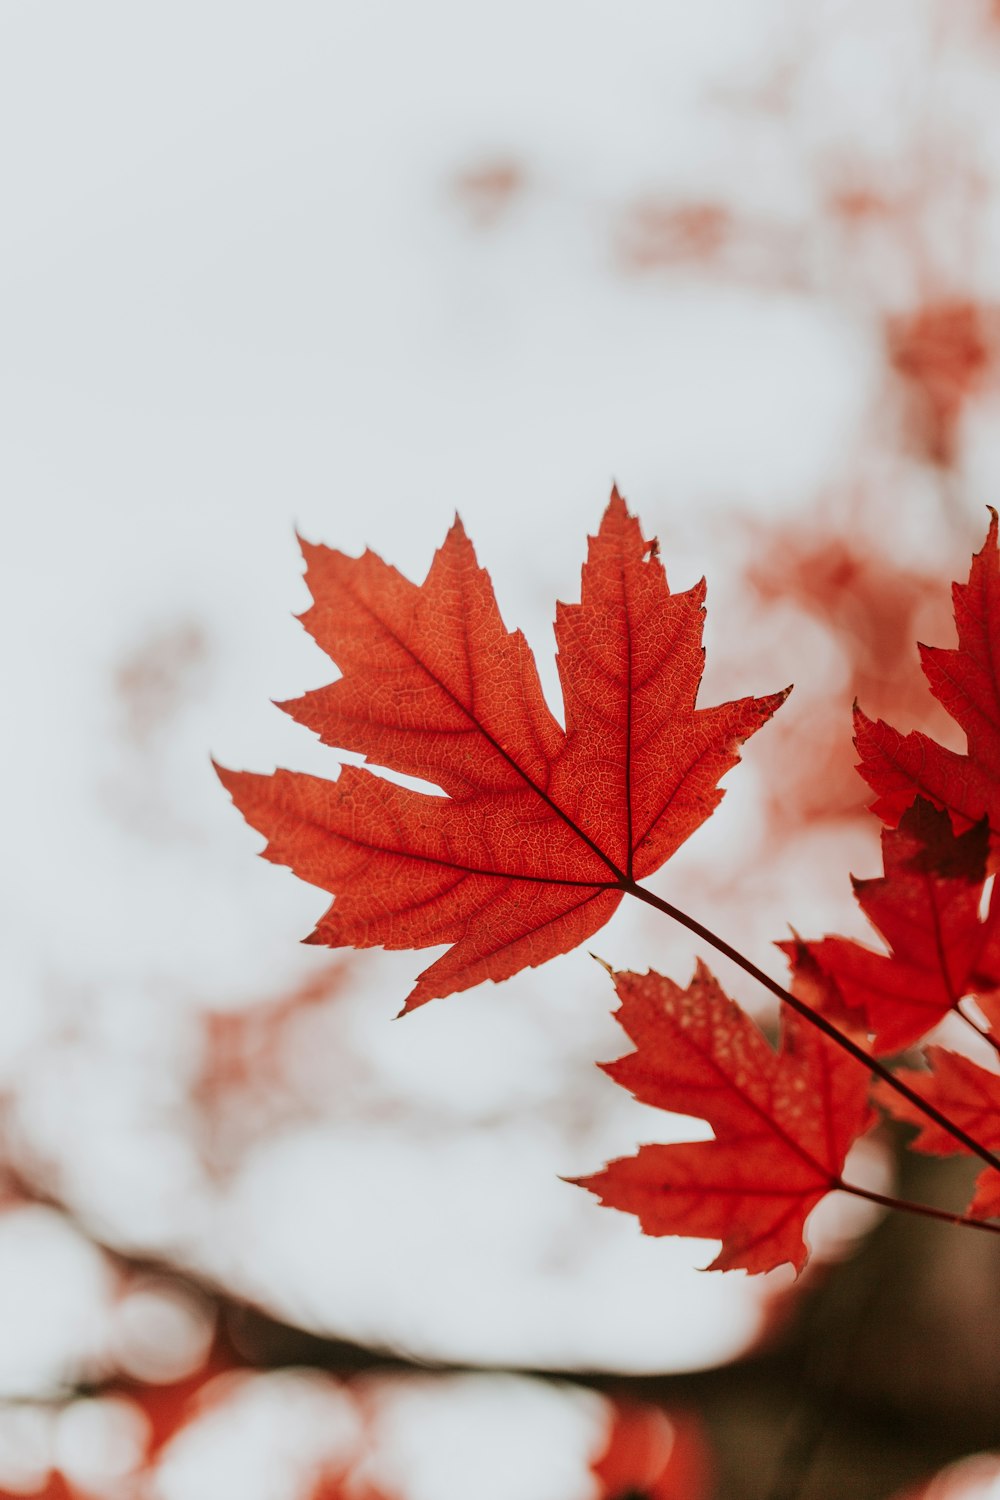 Red Maple Wallpapers - Top Free Red Maple Backgrounds - WallpaperAccess